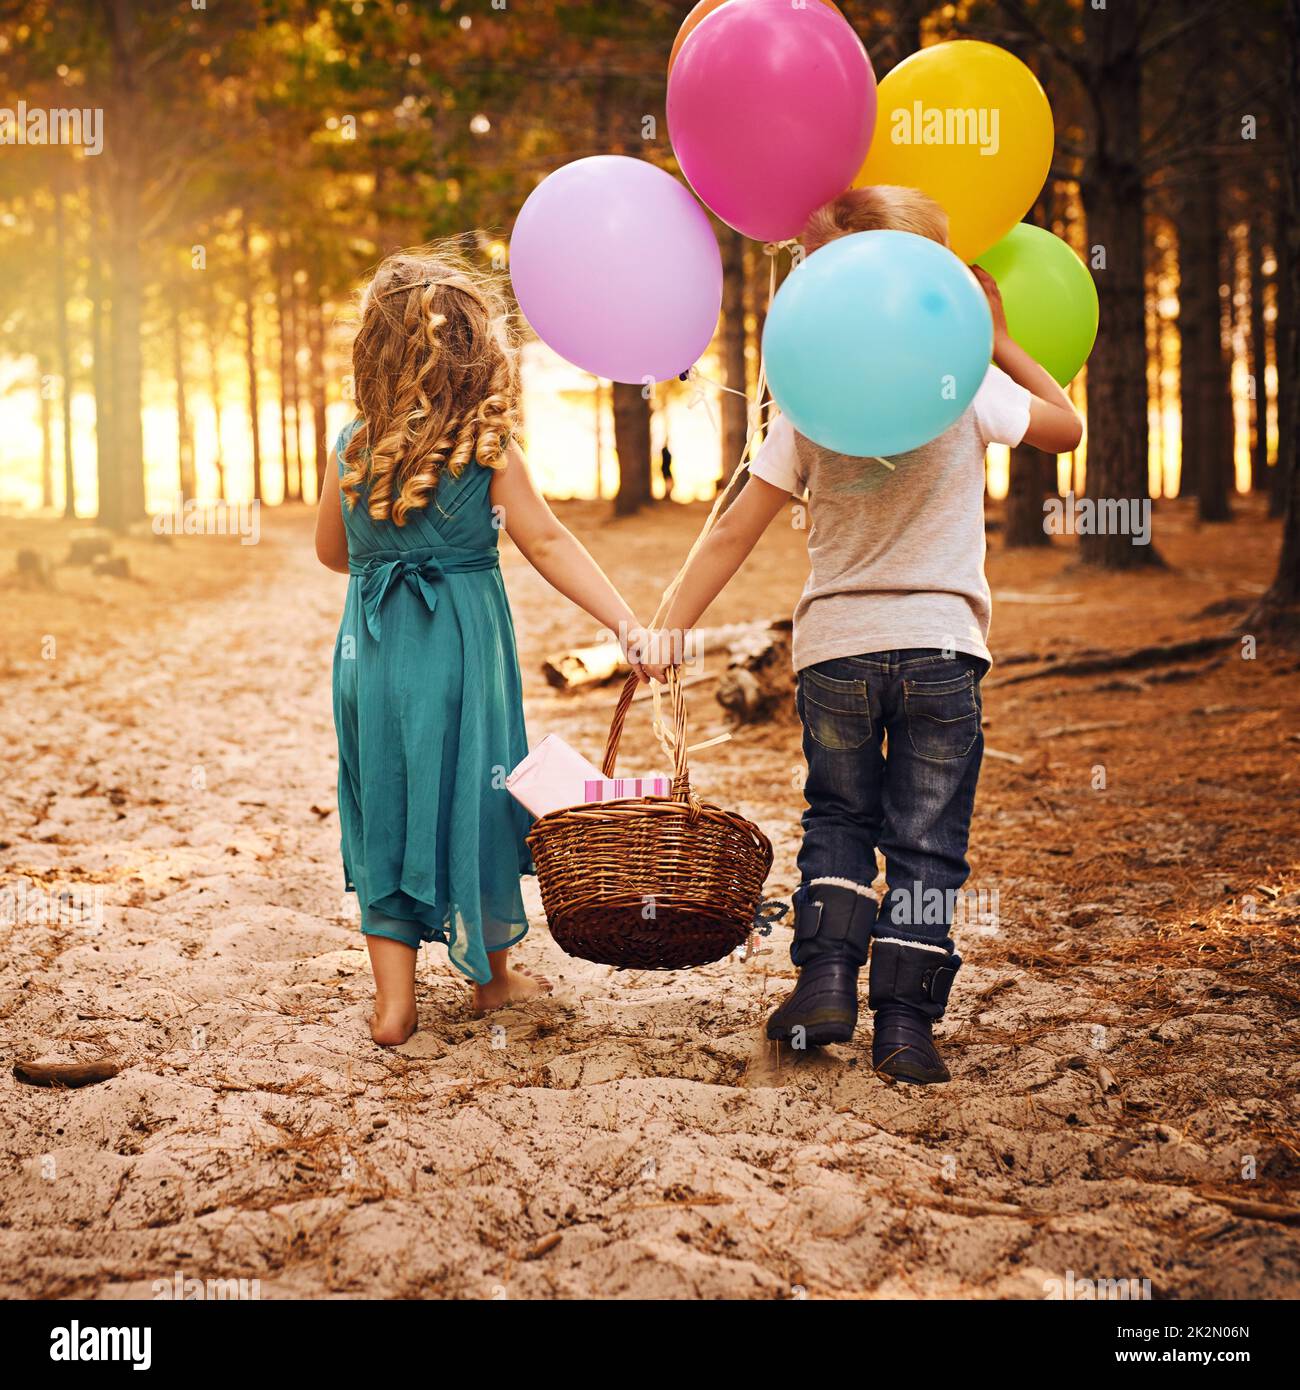 Best friends stick together. Shot of an unrecognizable little boy and girl holding a basket and balloons while walking outside in the woods. Stock Photo